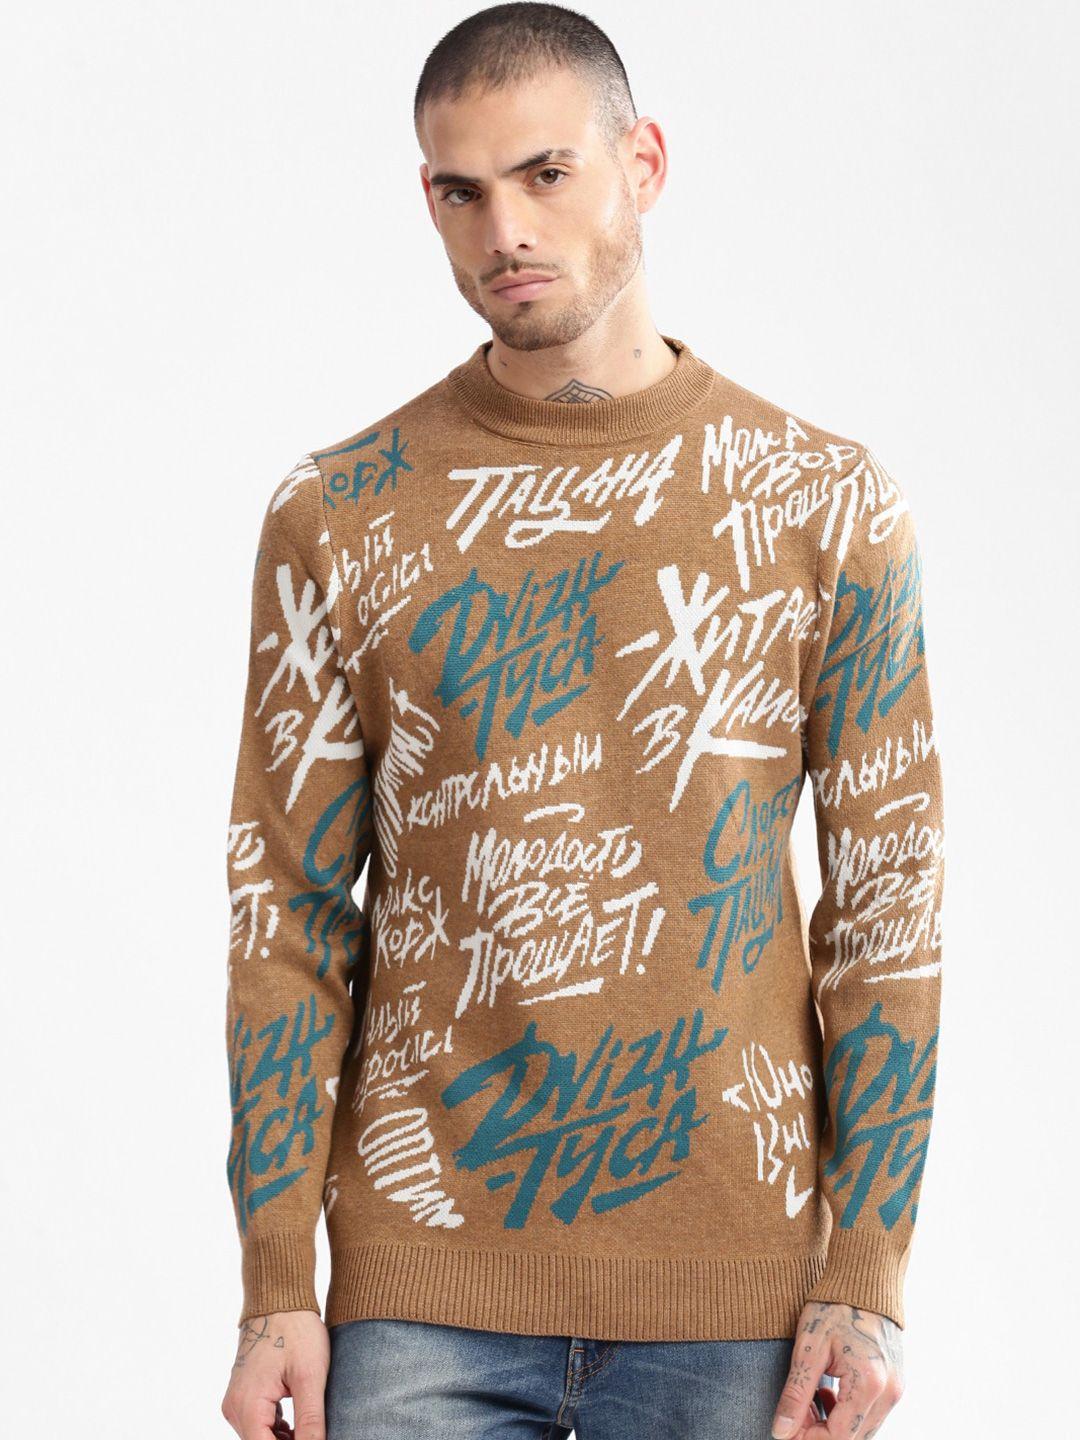 showoff typography printed acrylic pullover sweater